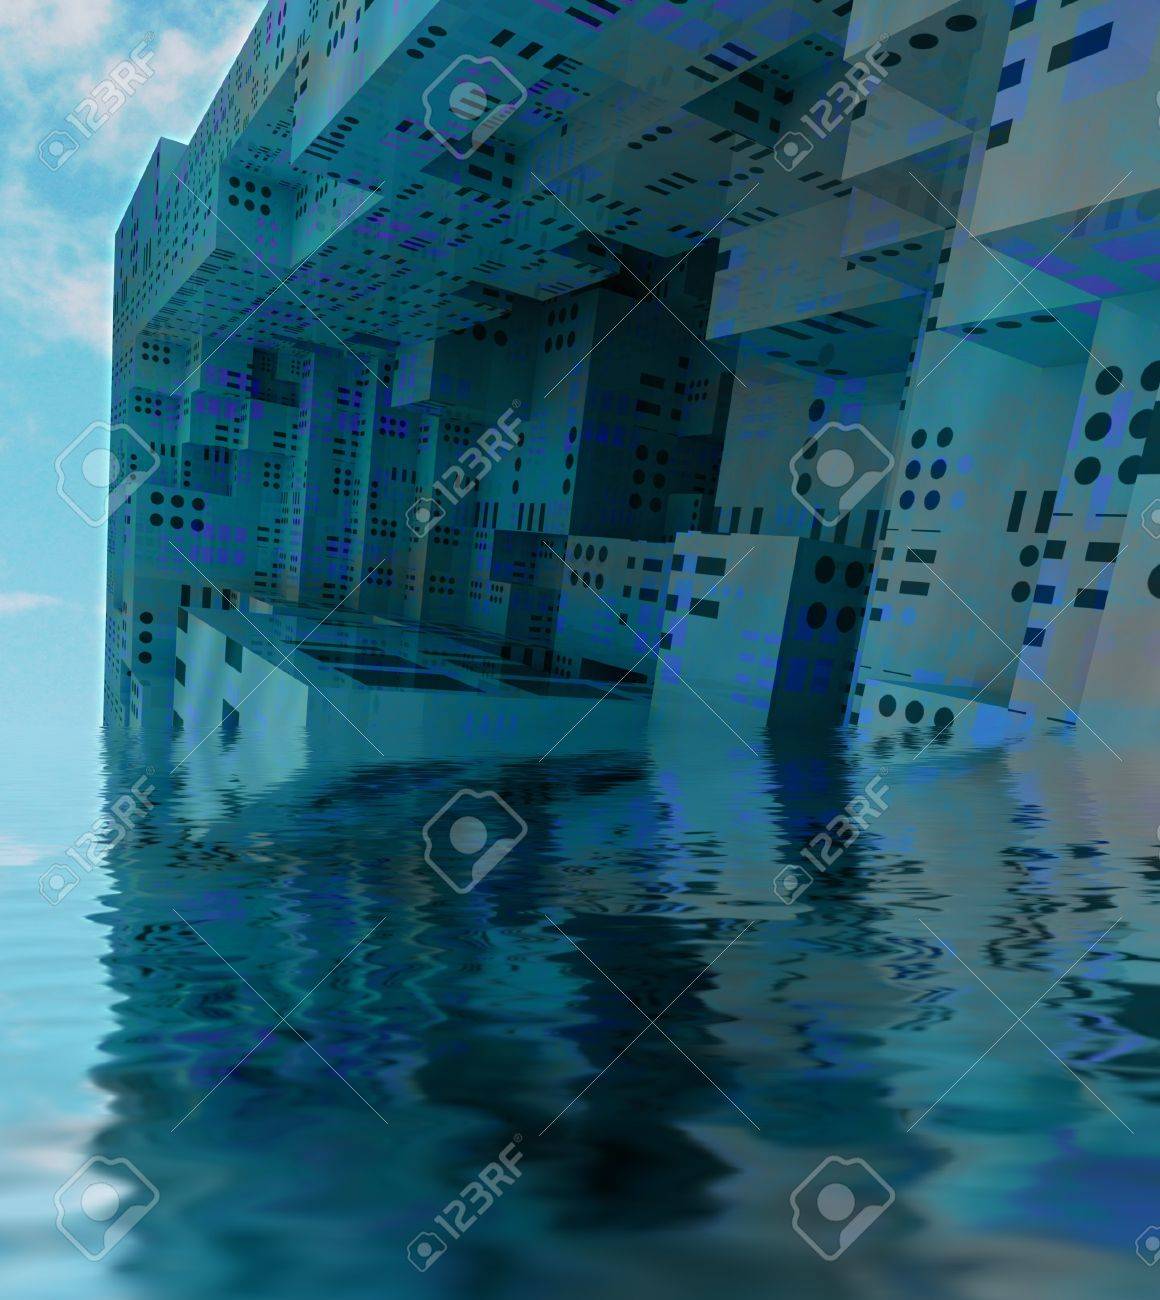 Sunked Modern City Observation Spaceship With Water Reflection